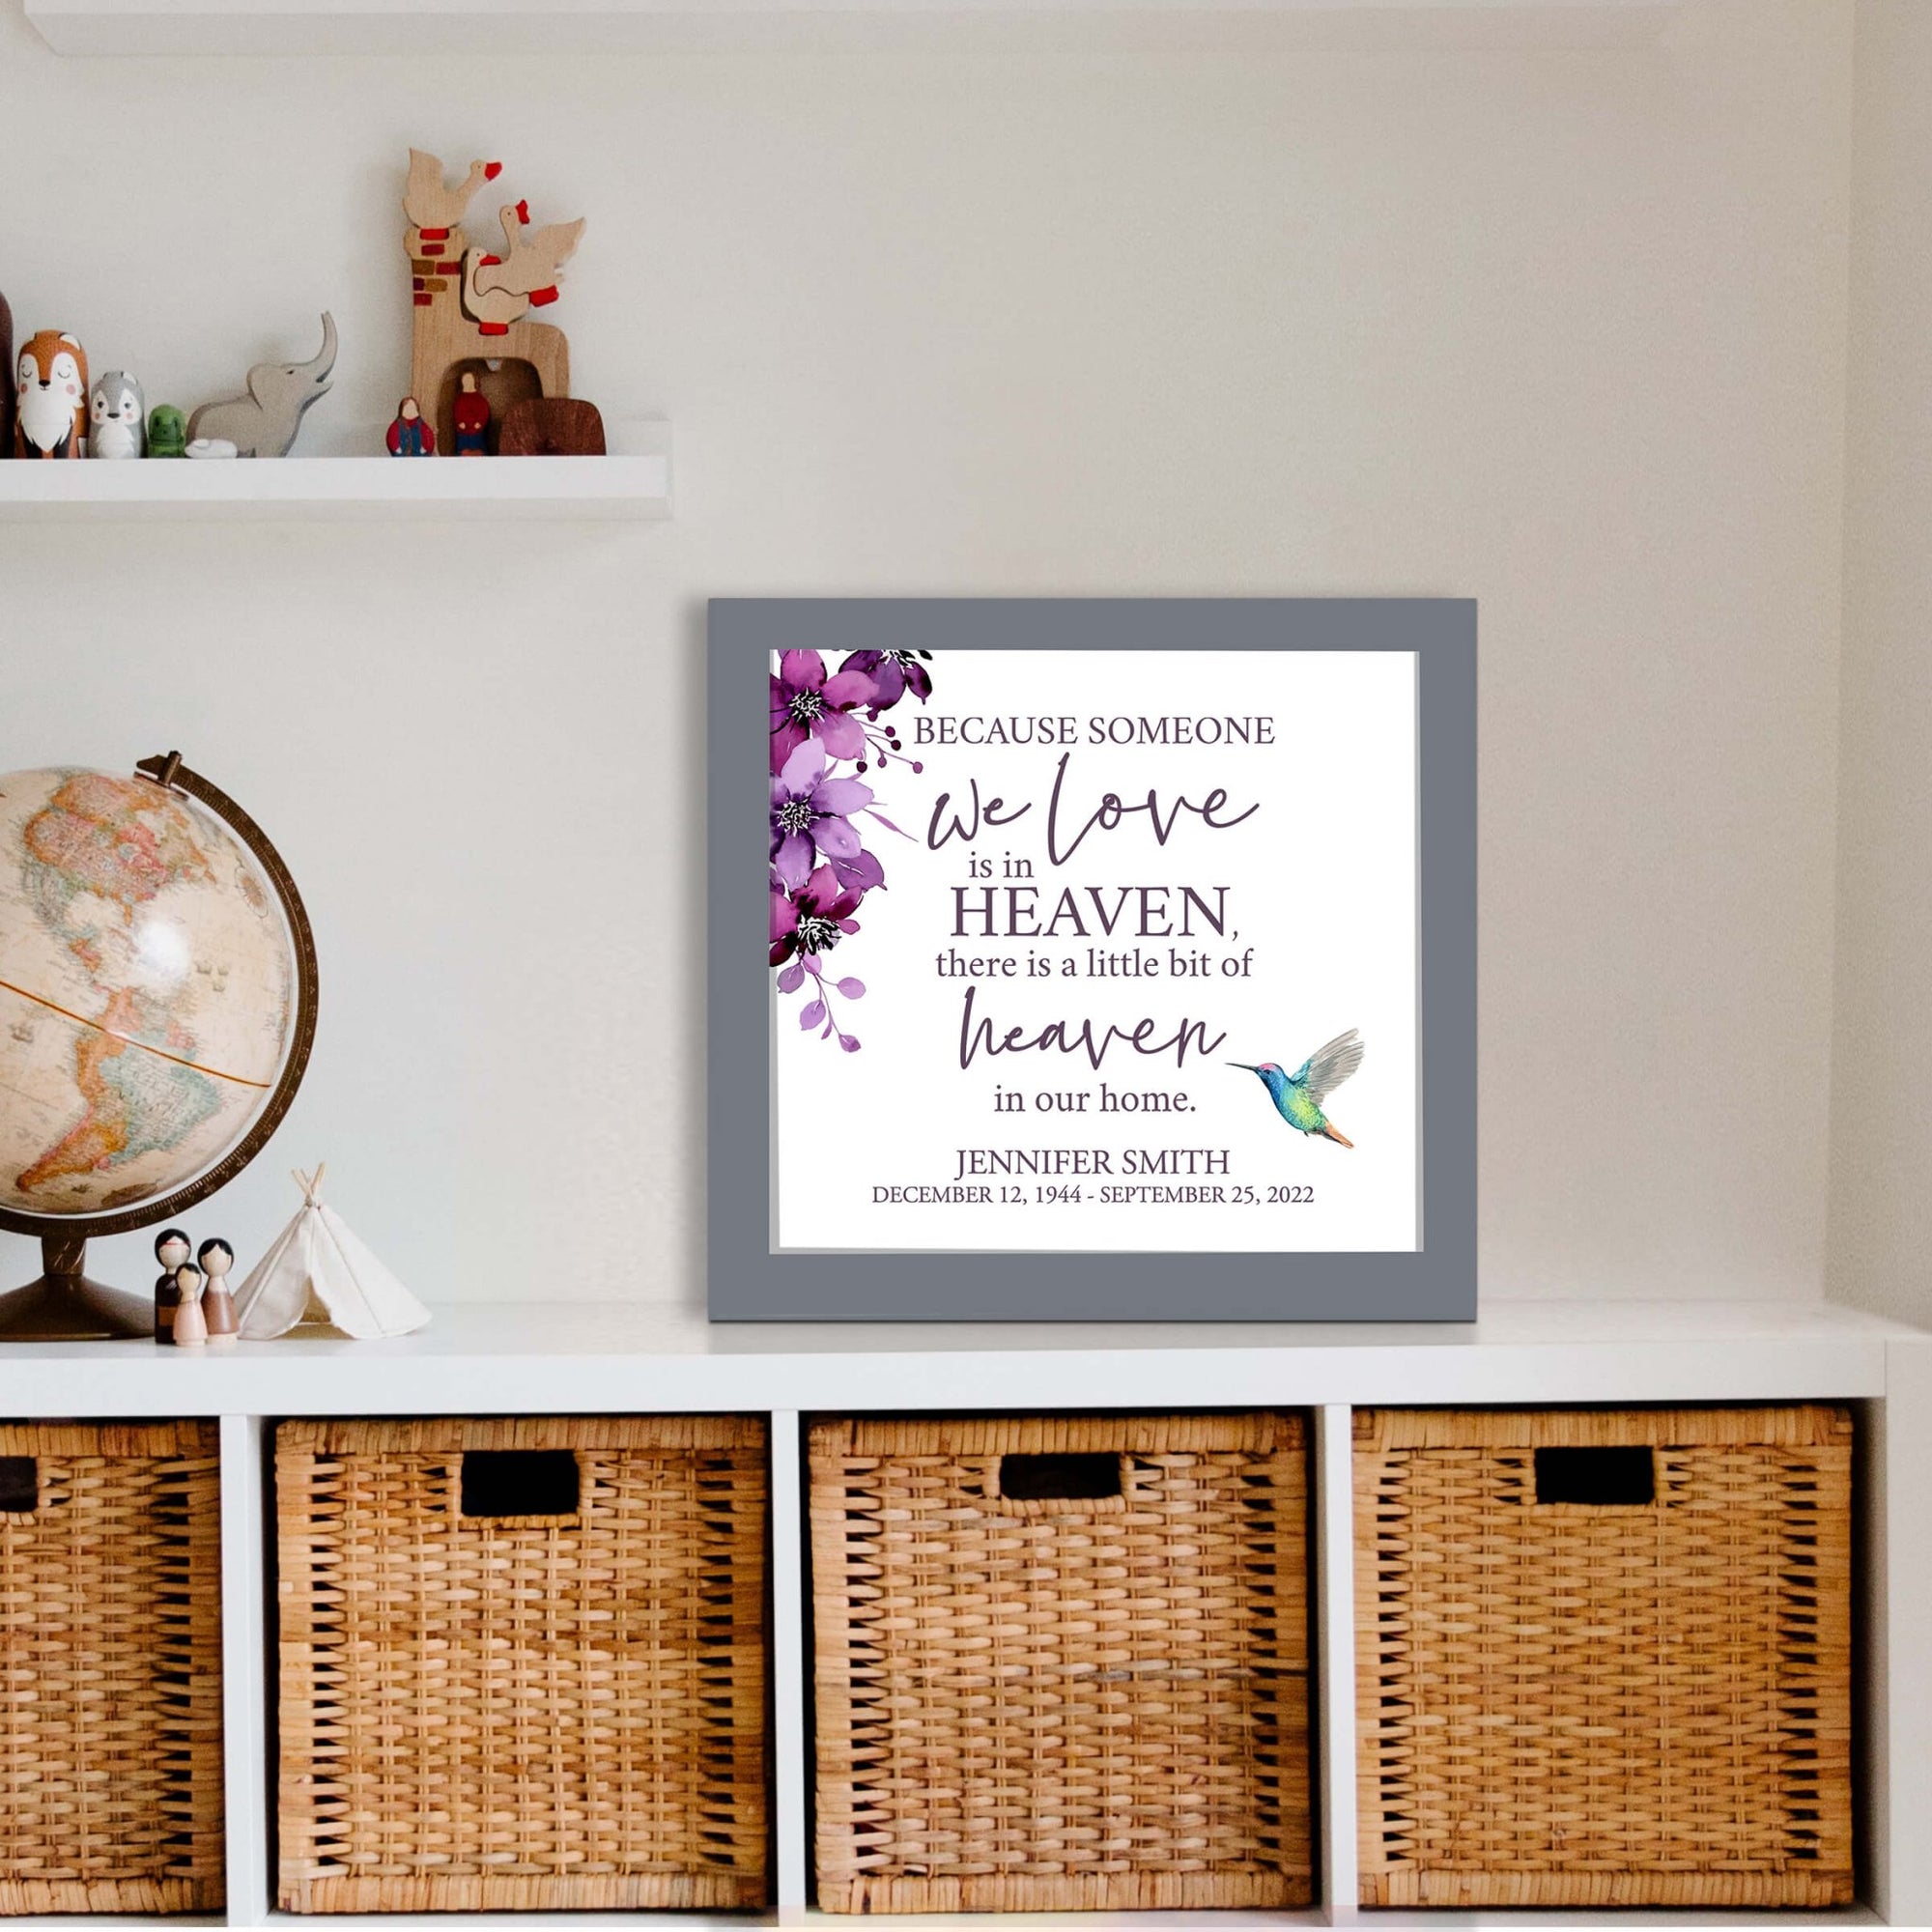 Personalized Memorial Framed Shadow Box for Loss of Loved One - LifeSong Milestones